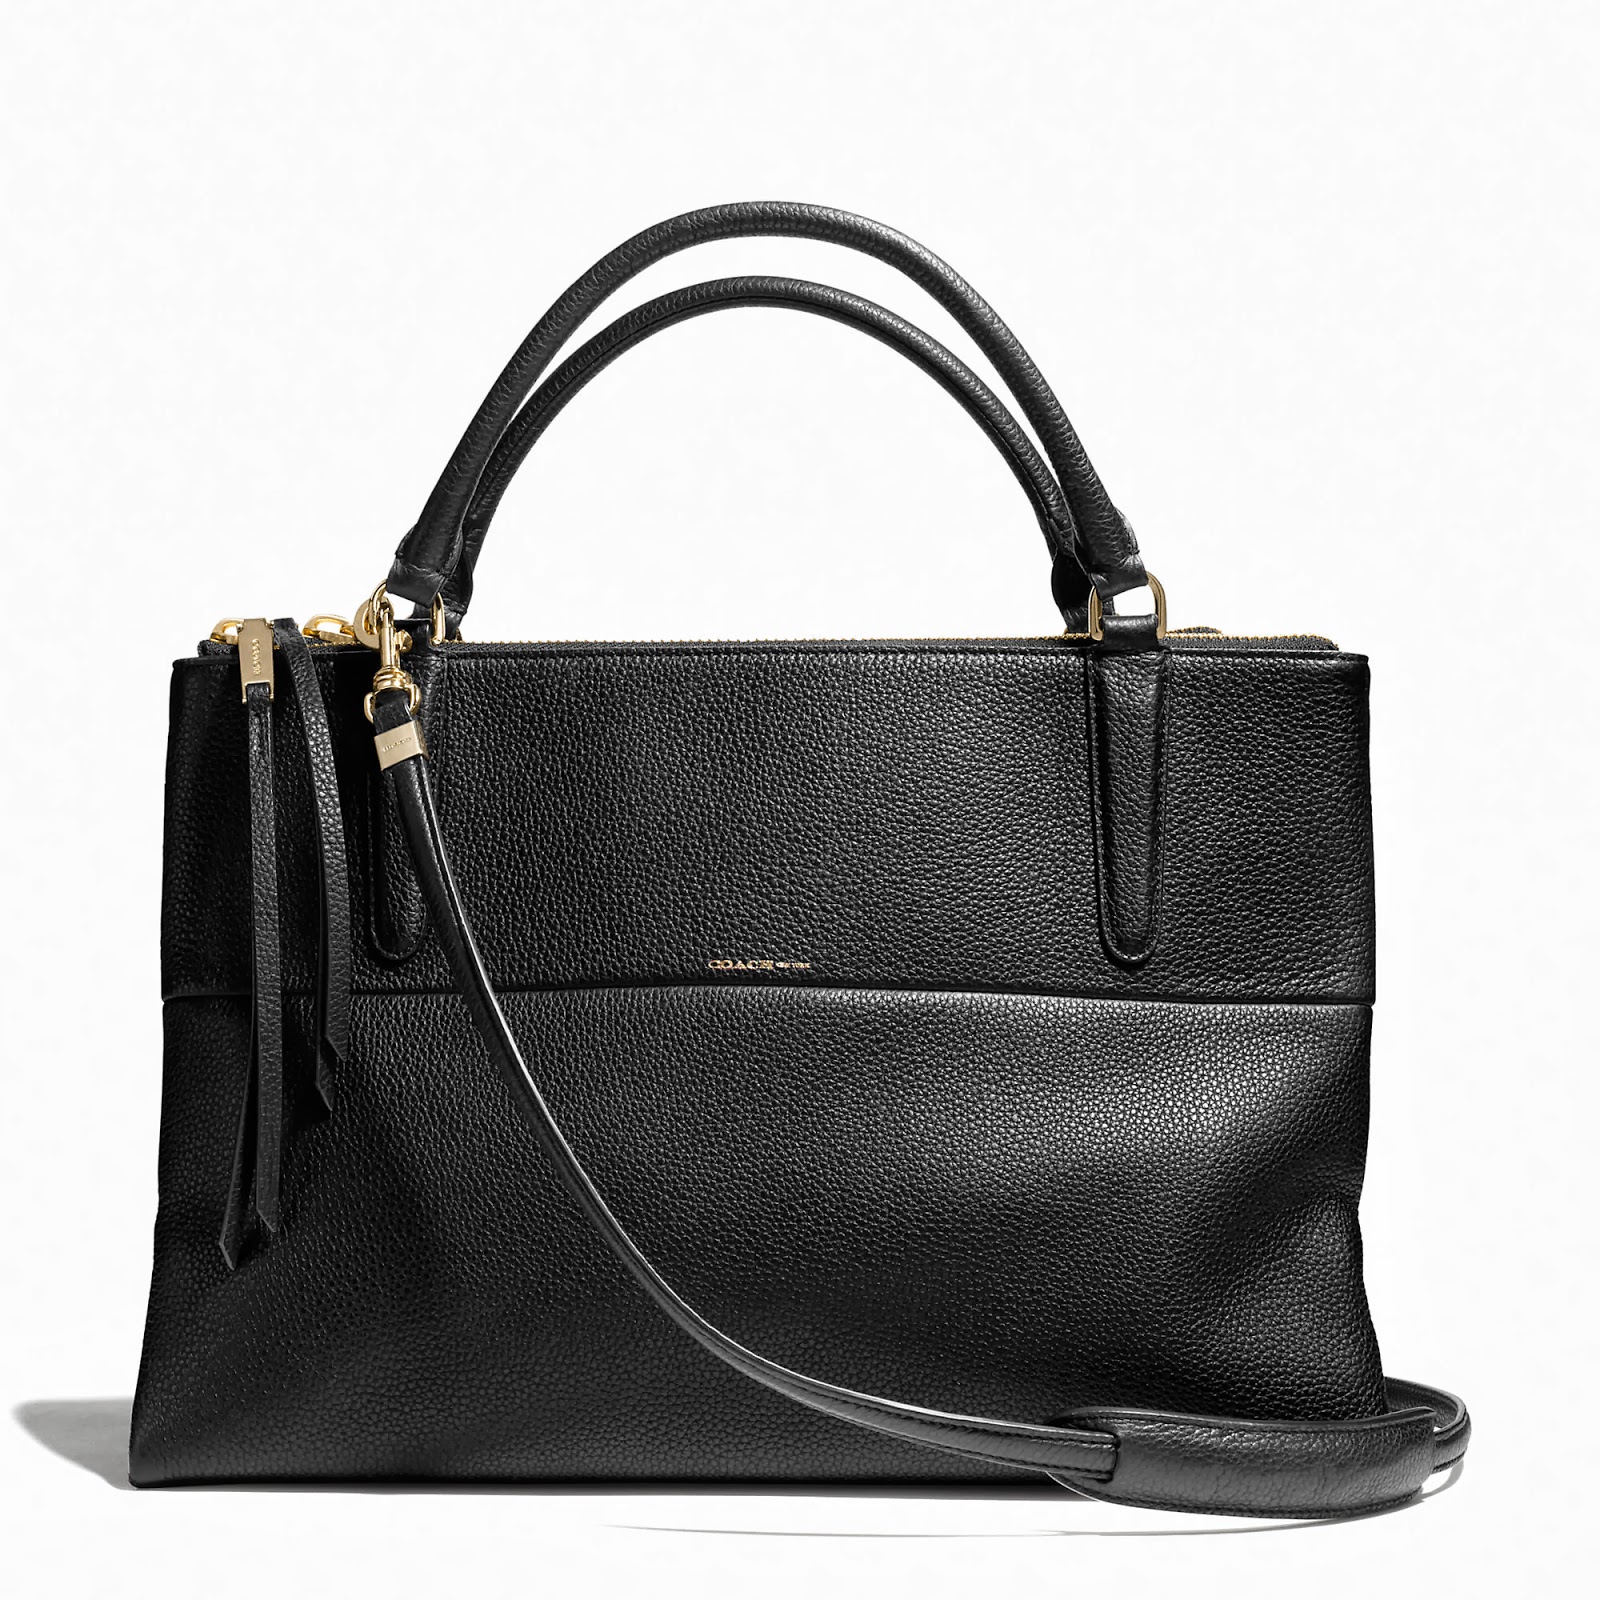 Coach - Bourough Bag in Black Pebbled Leather - a chic bag for city ...